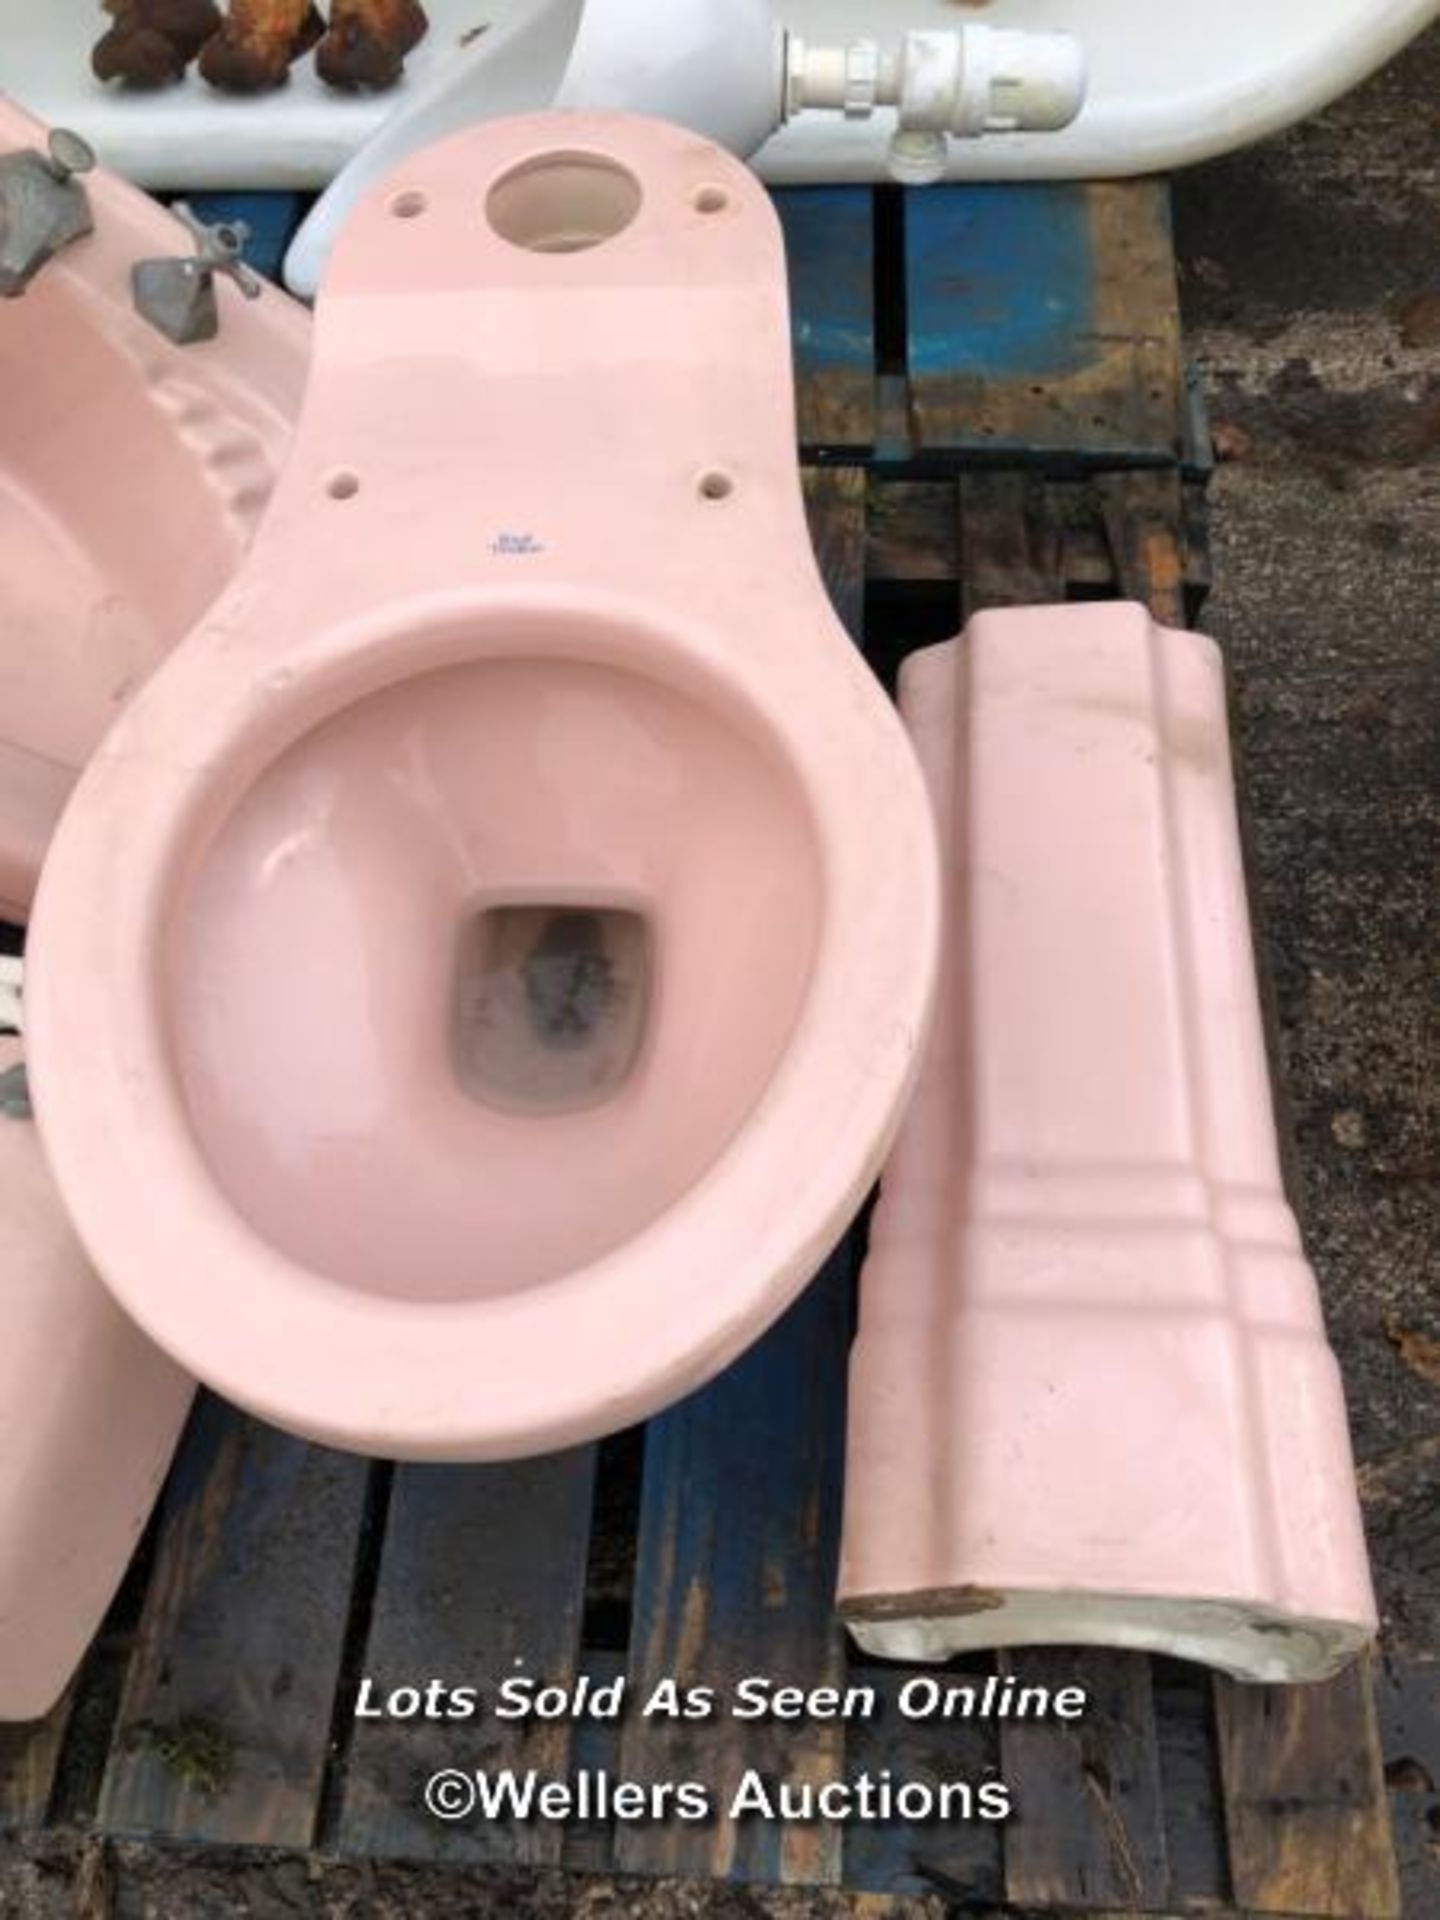 COMPLETE PINK BATHROOM SUITE CIRCA 1970'S INCLUDING ROYAL DOULTON TOILET AND STRANDARD SINK - Image 2 of 7